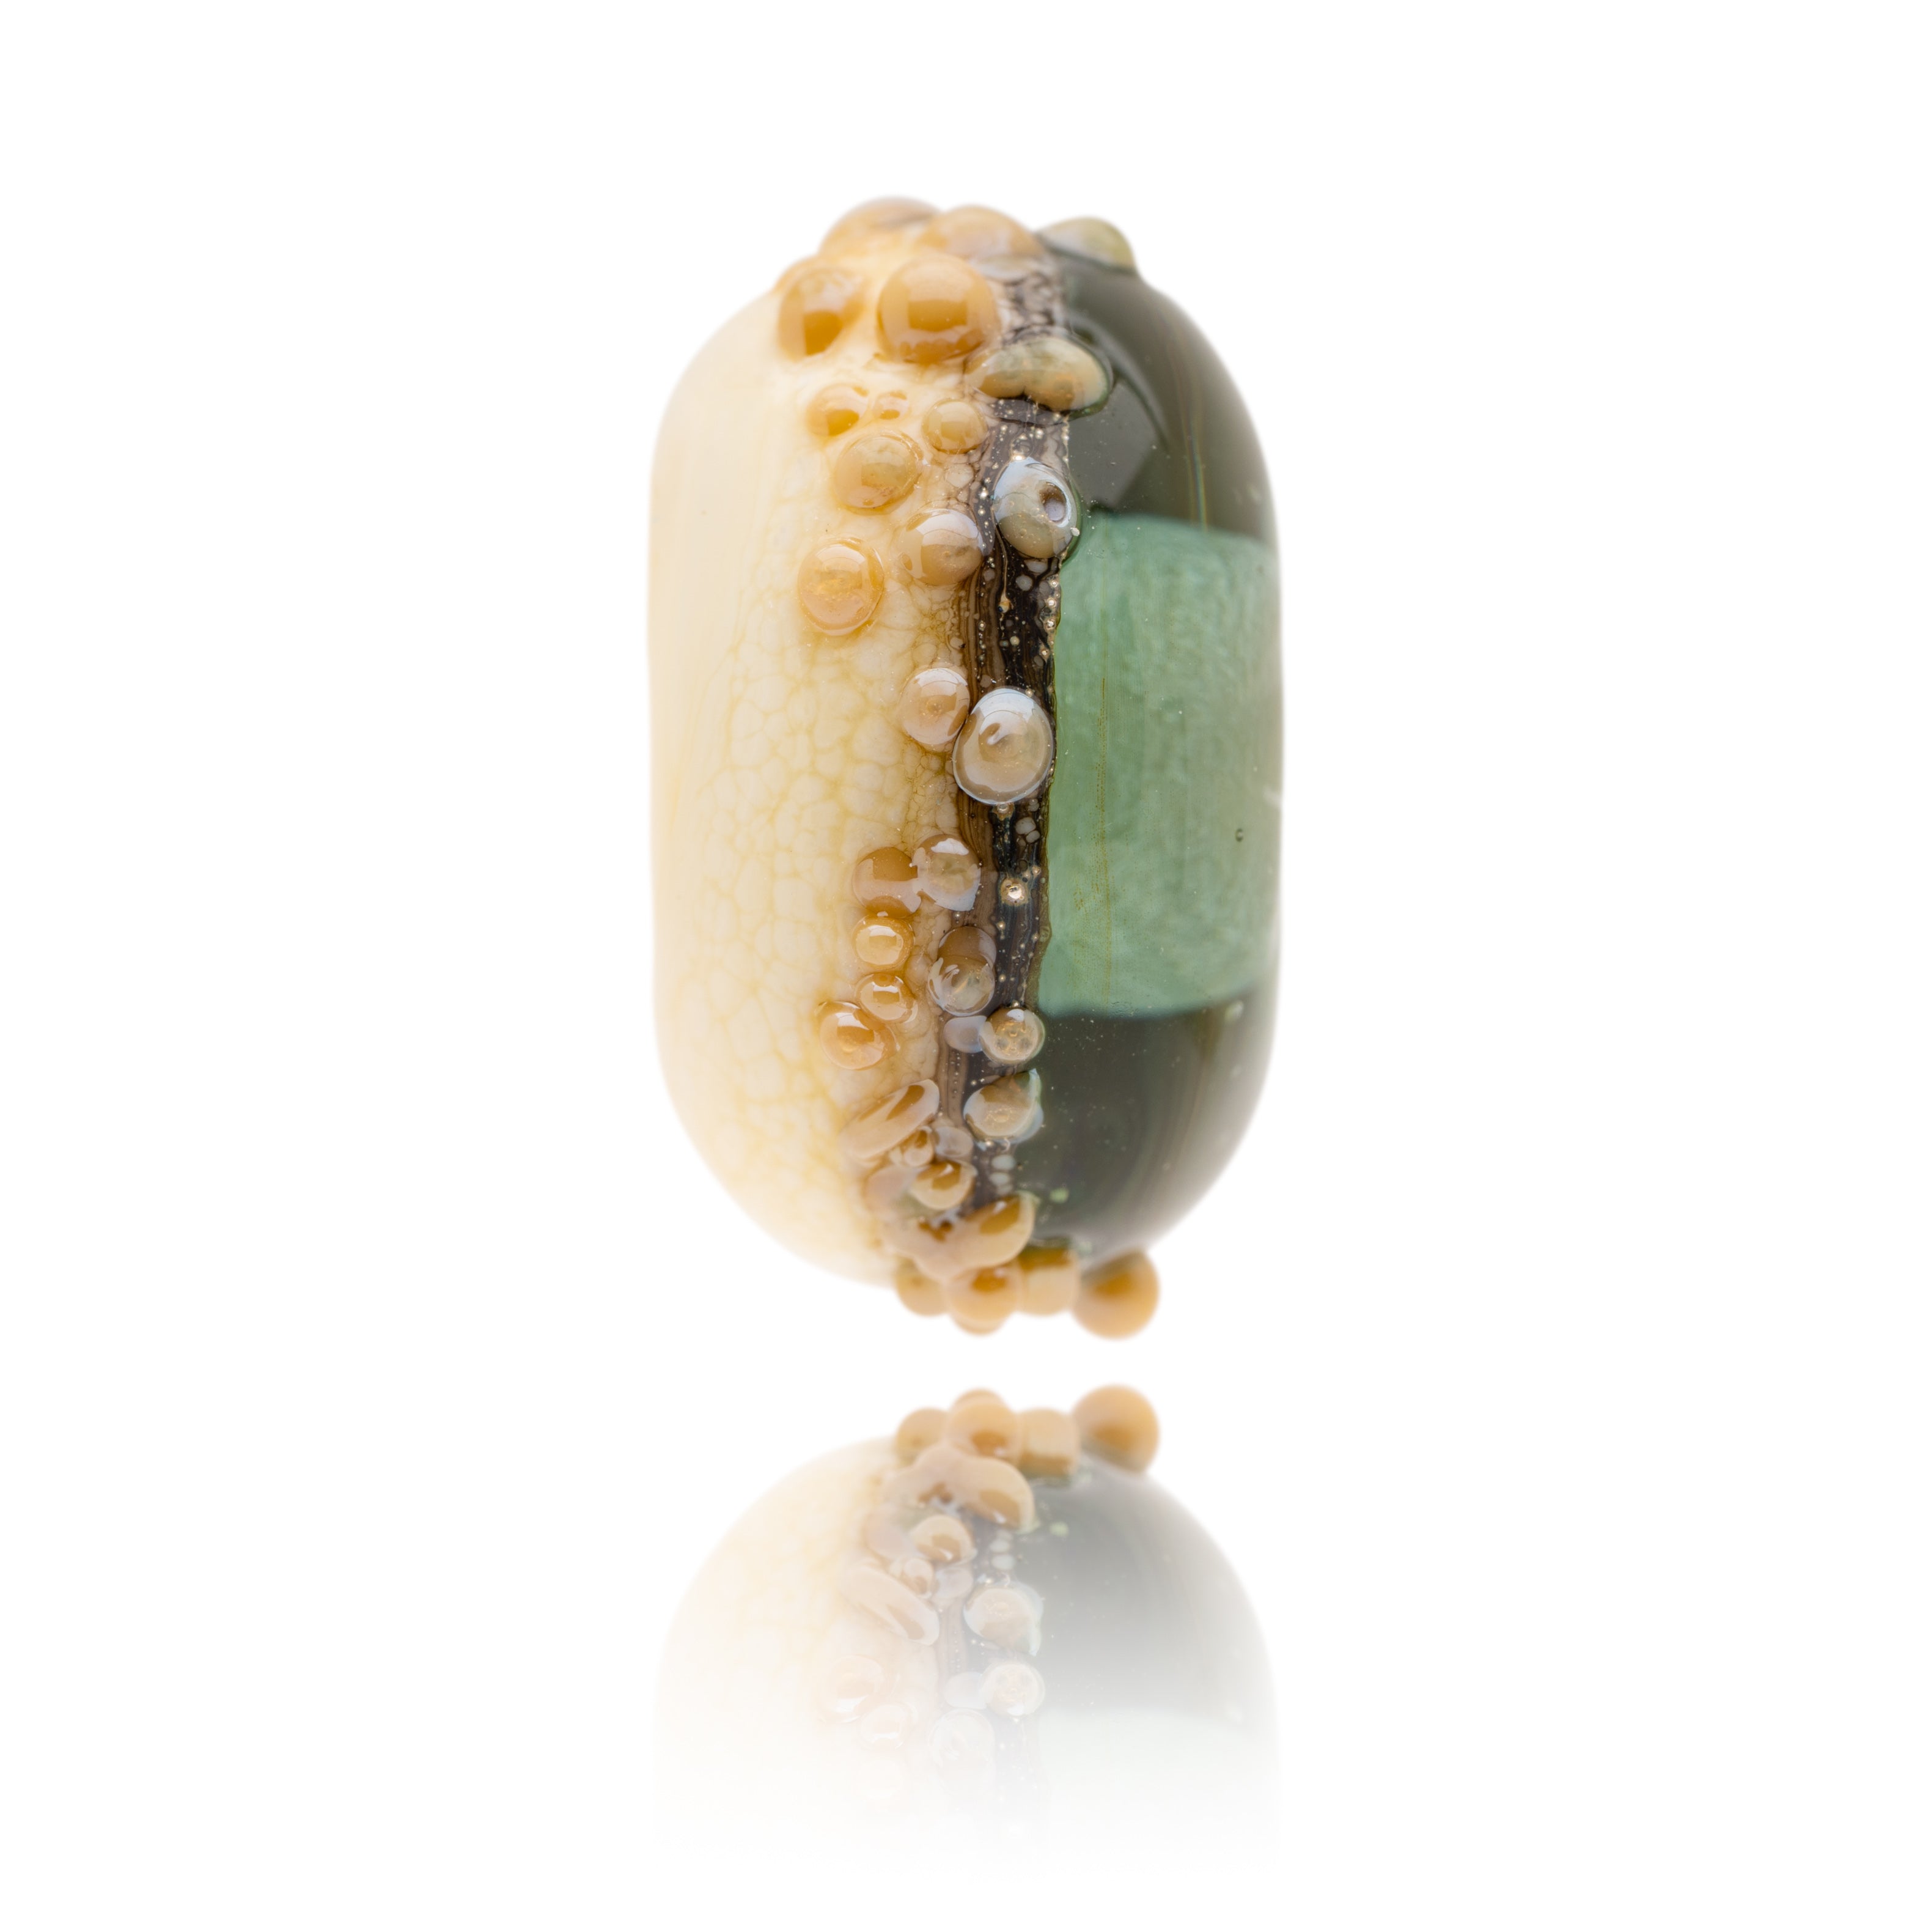 Green and ivory glass bead decorated with raised dots of brown glass, representing Worthing Beach in Sussex.